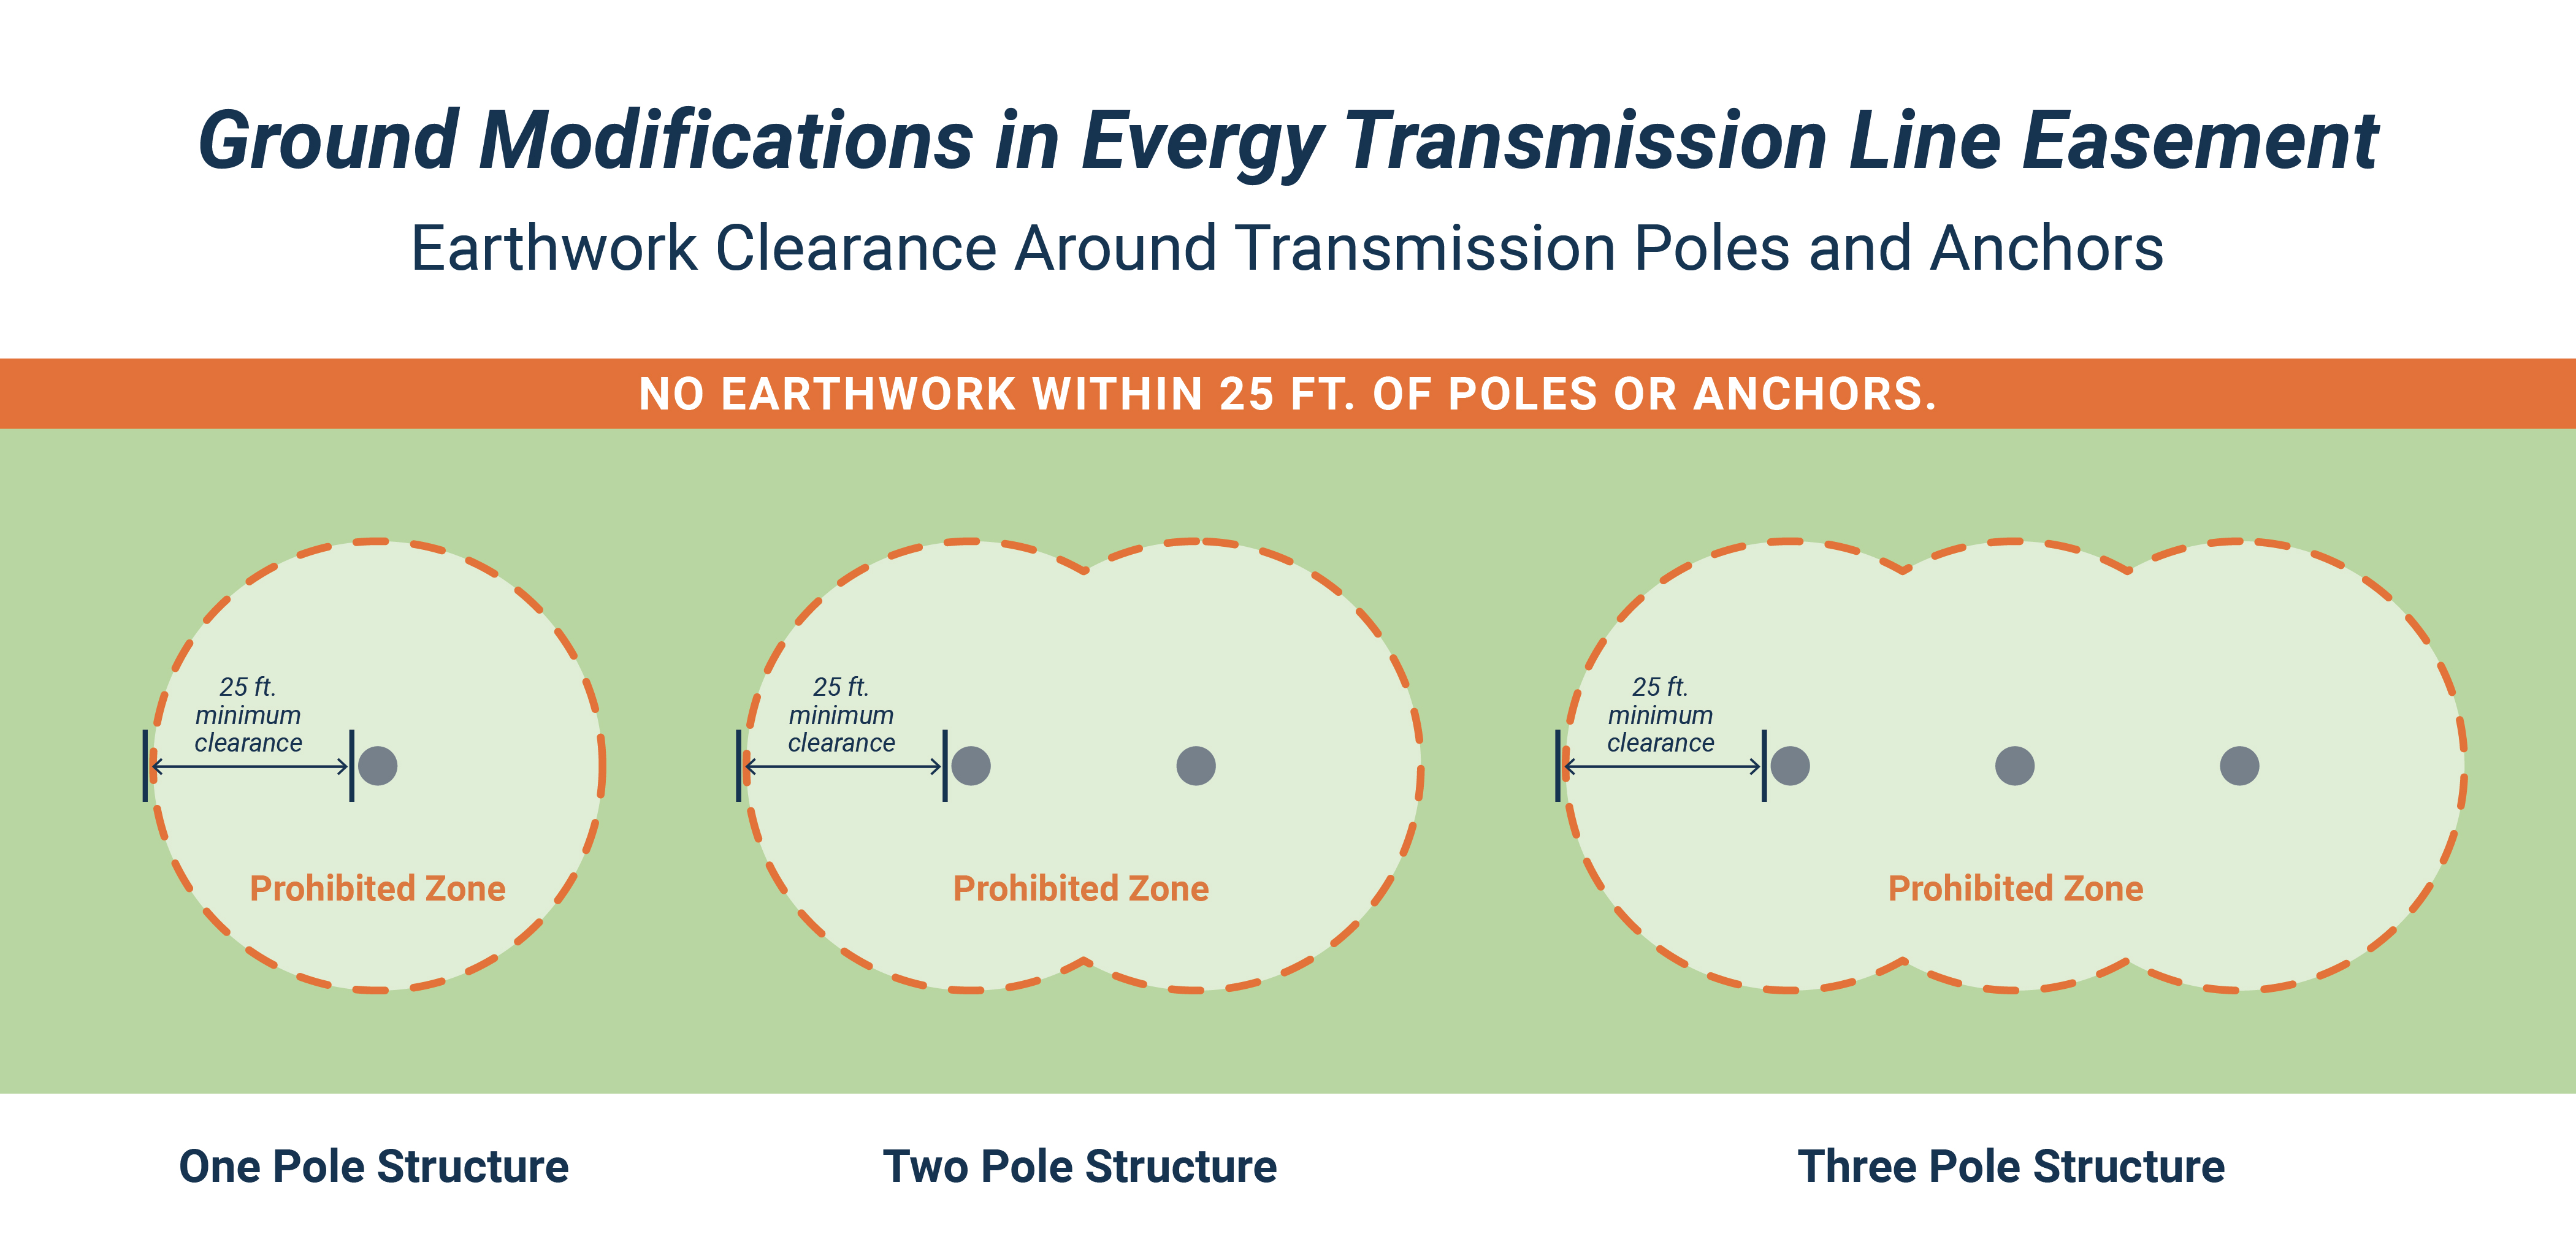 Diagrams of the earthwork clearance around transmission poles and anchors